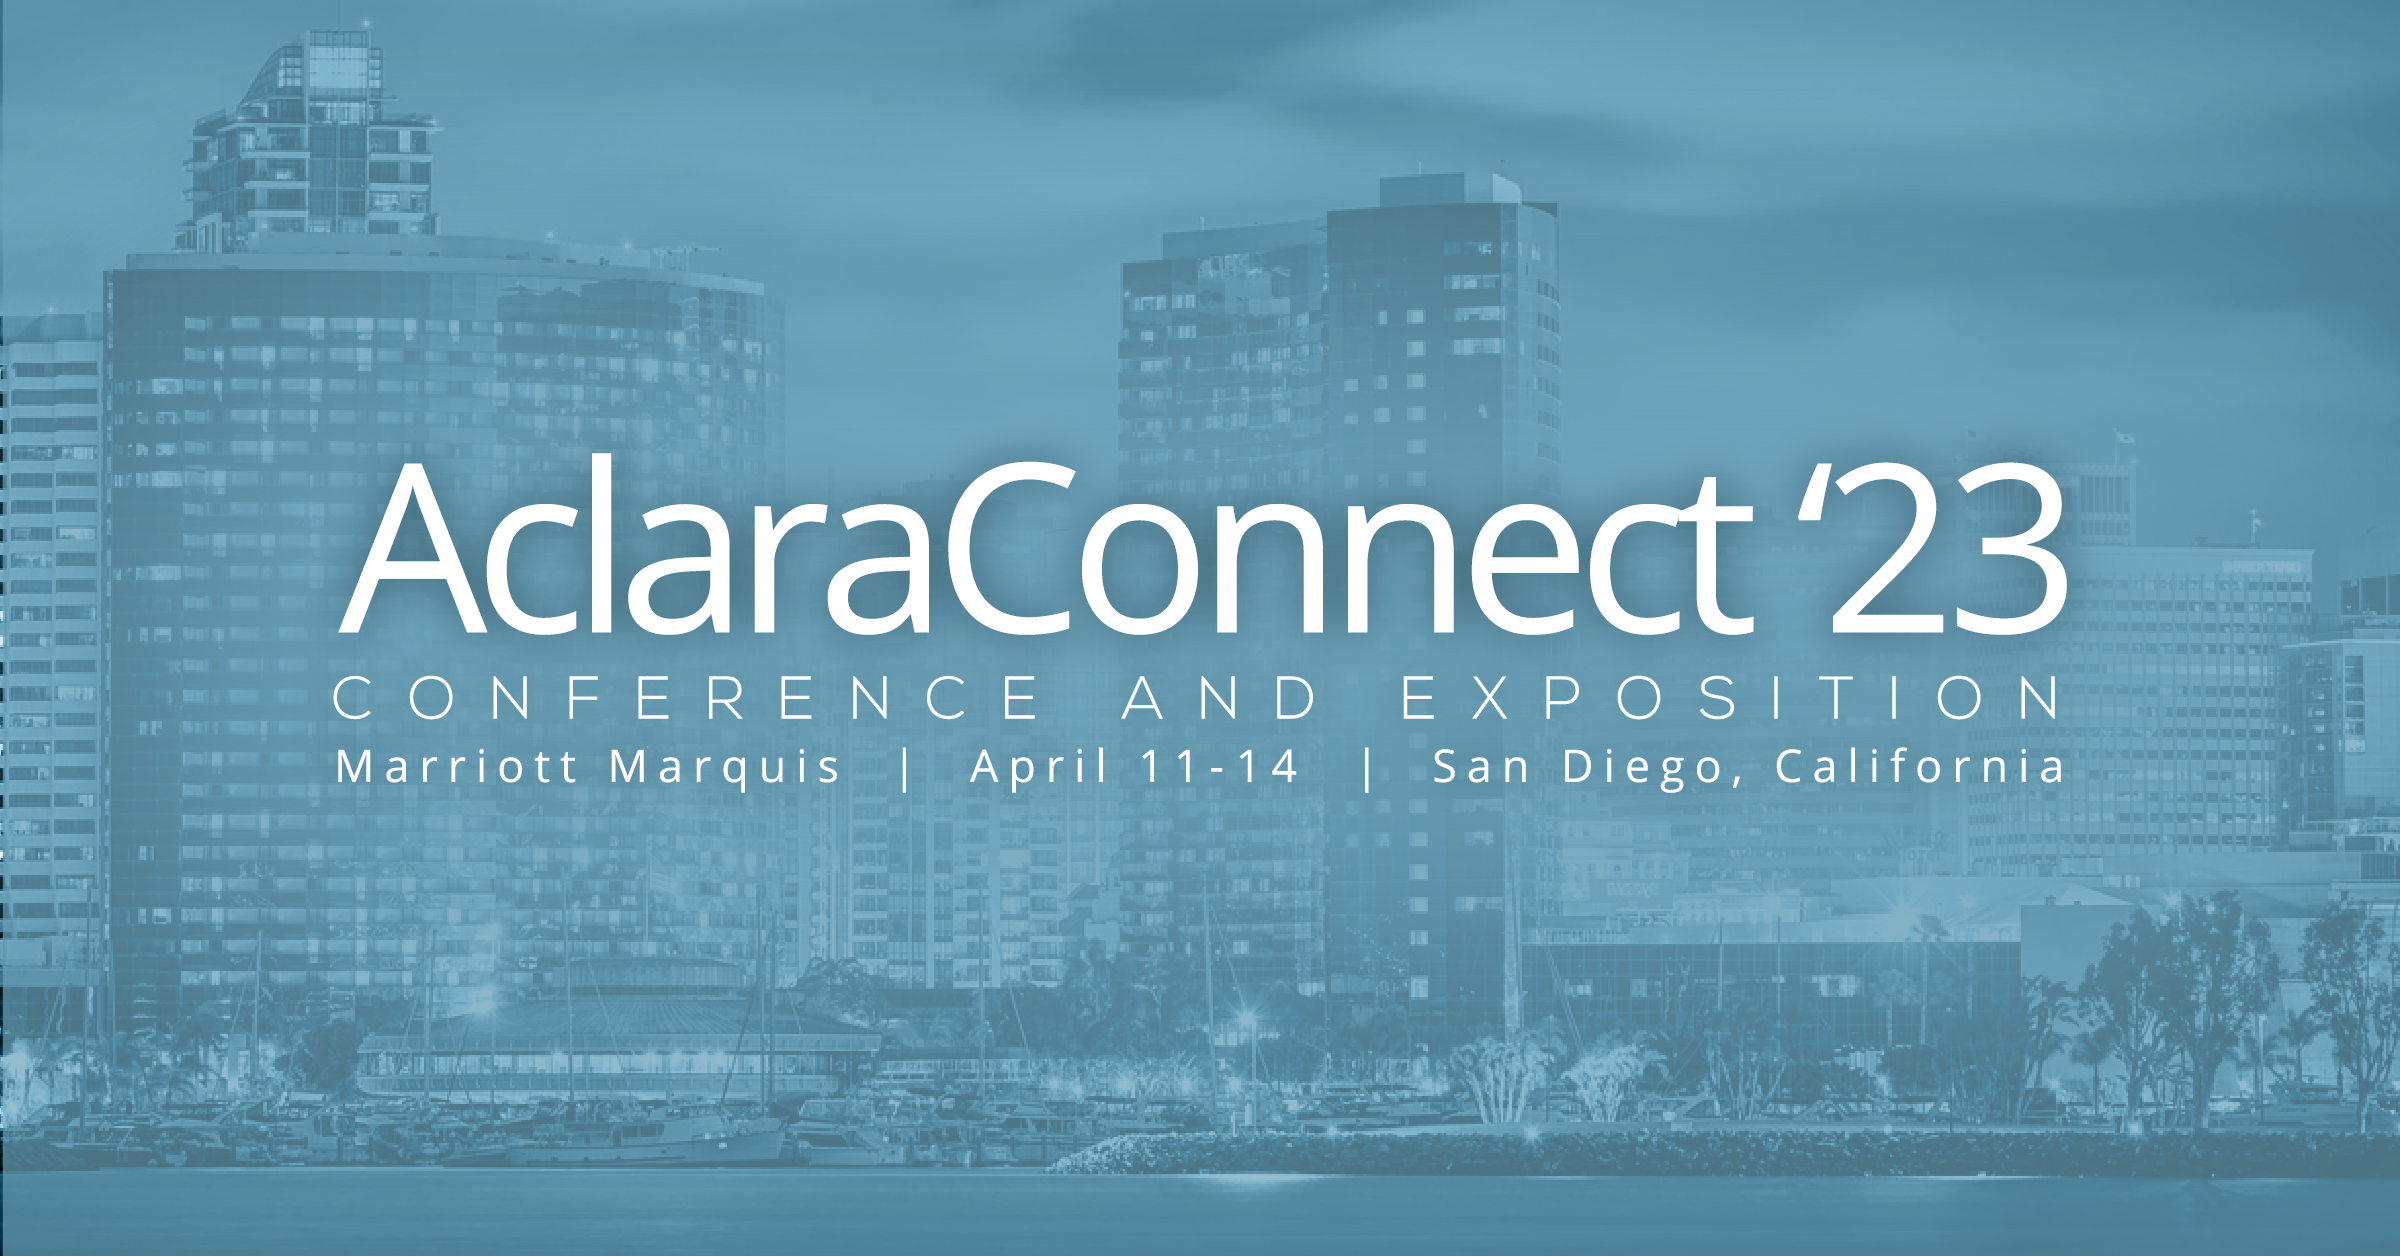 Join us in San Diego for AclaraConnect 2023